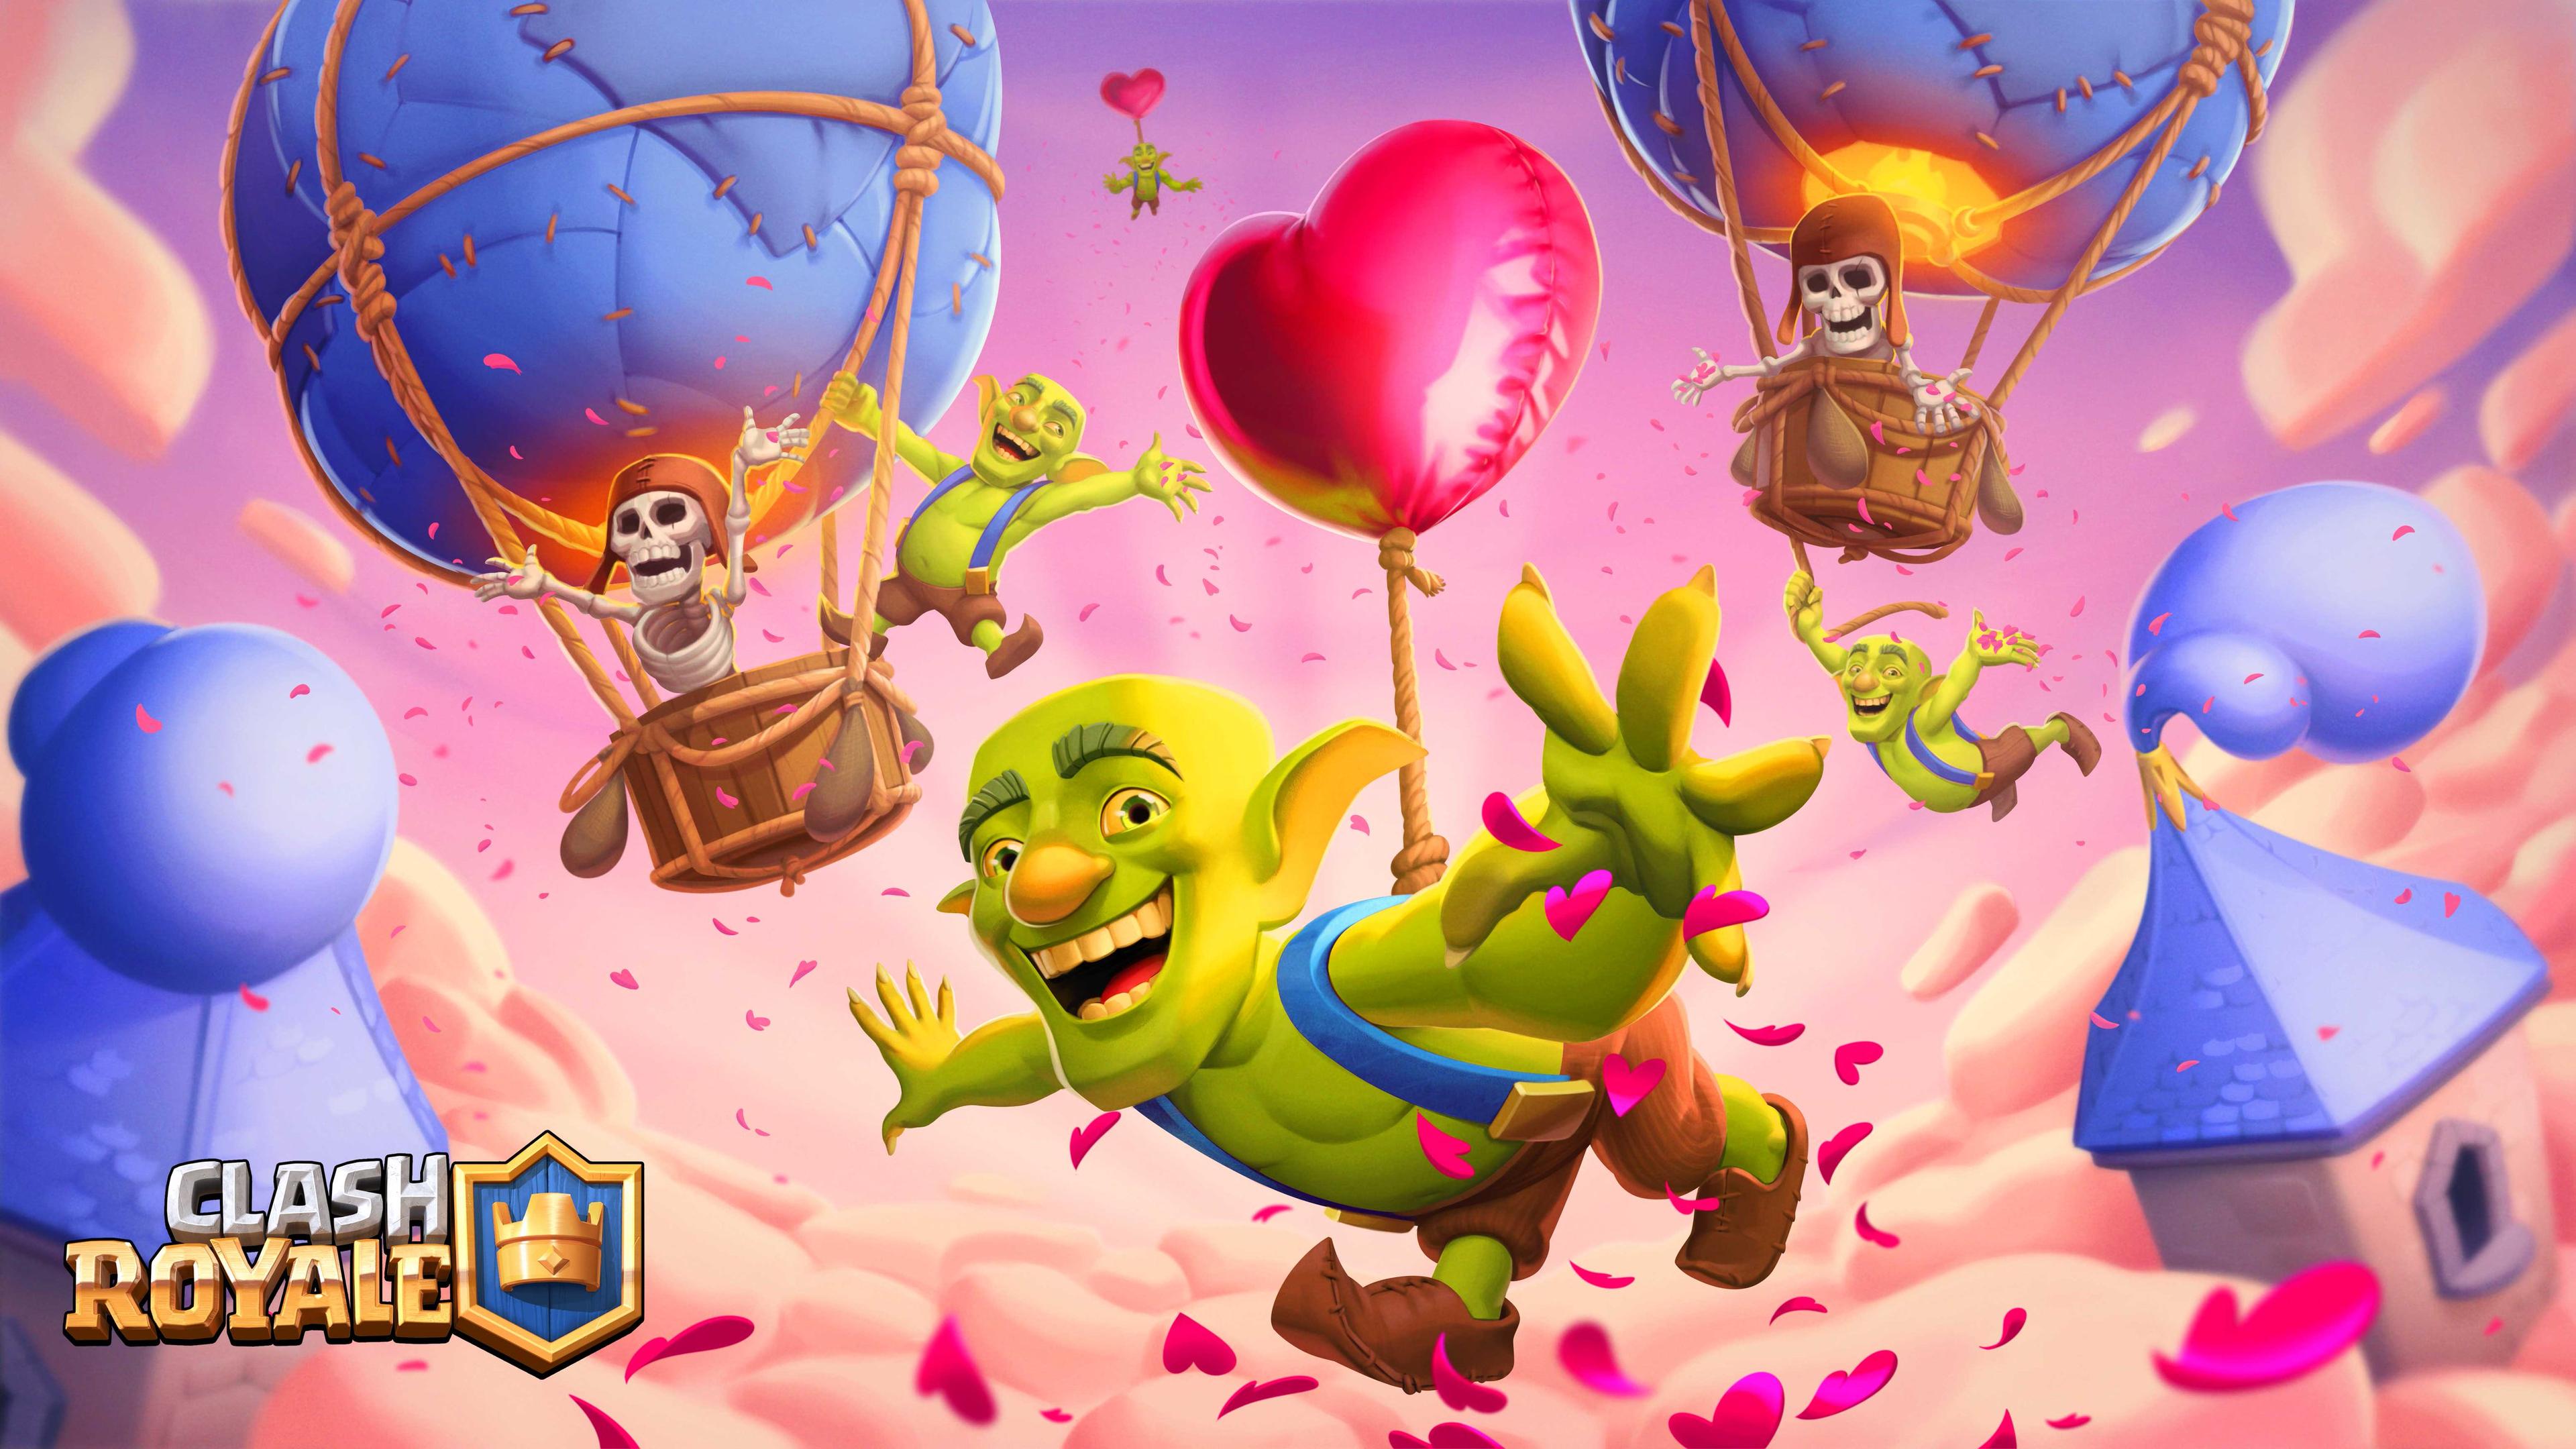 cover art for the Goblin Party Season in Clash Royale.